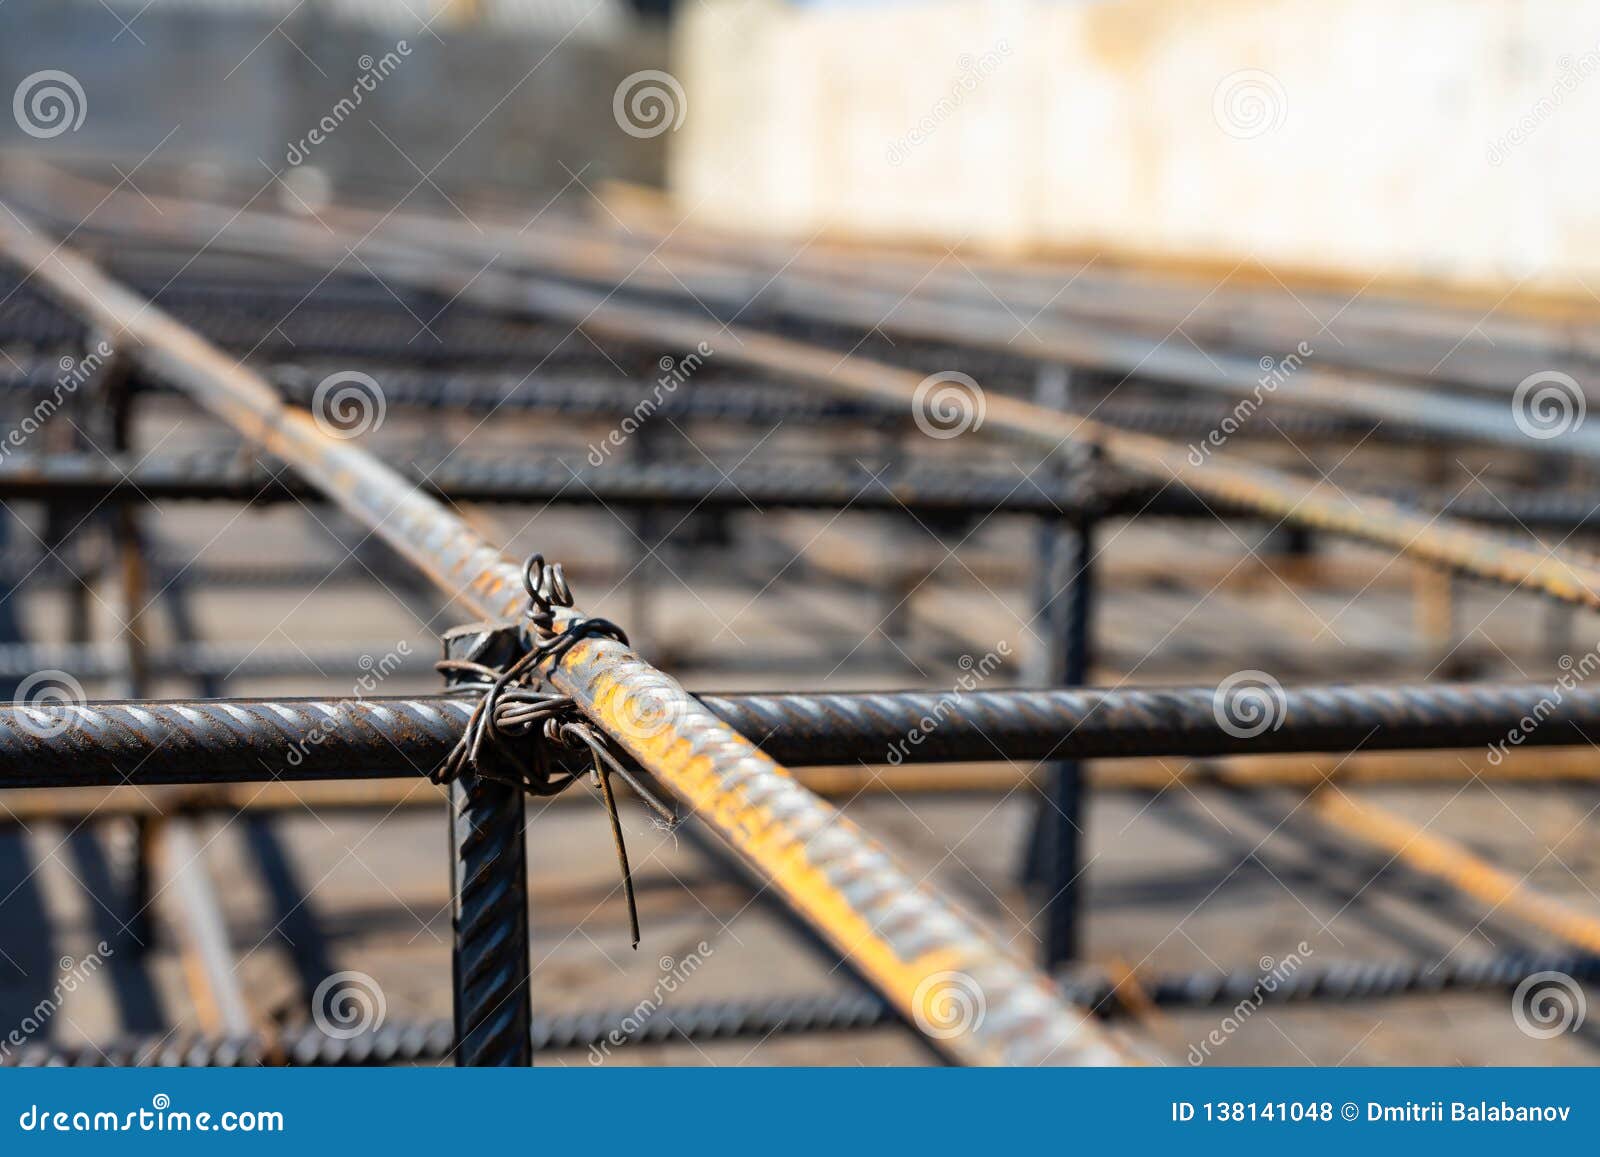 tie rebar beam cage on construction site. steel reinforcing bar for reinforced concrete